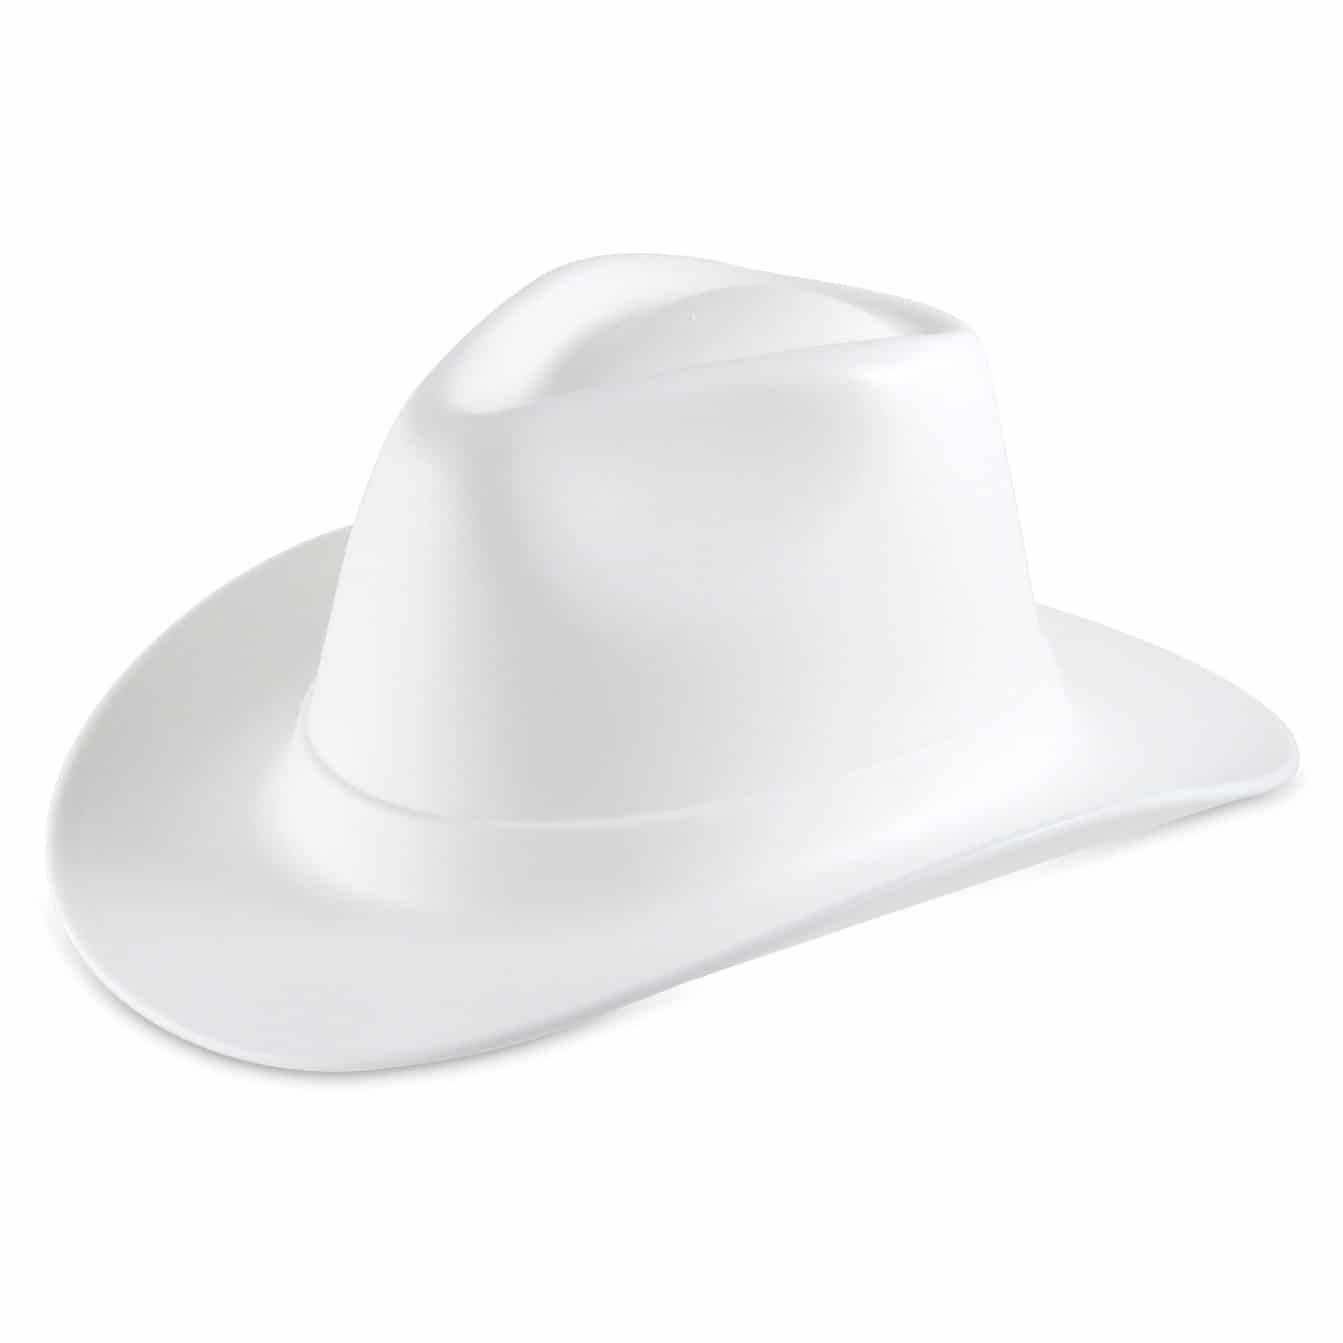 Occunomix Hard Hat White Vulcan Cowboy Style One Size Fits Most